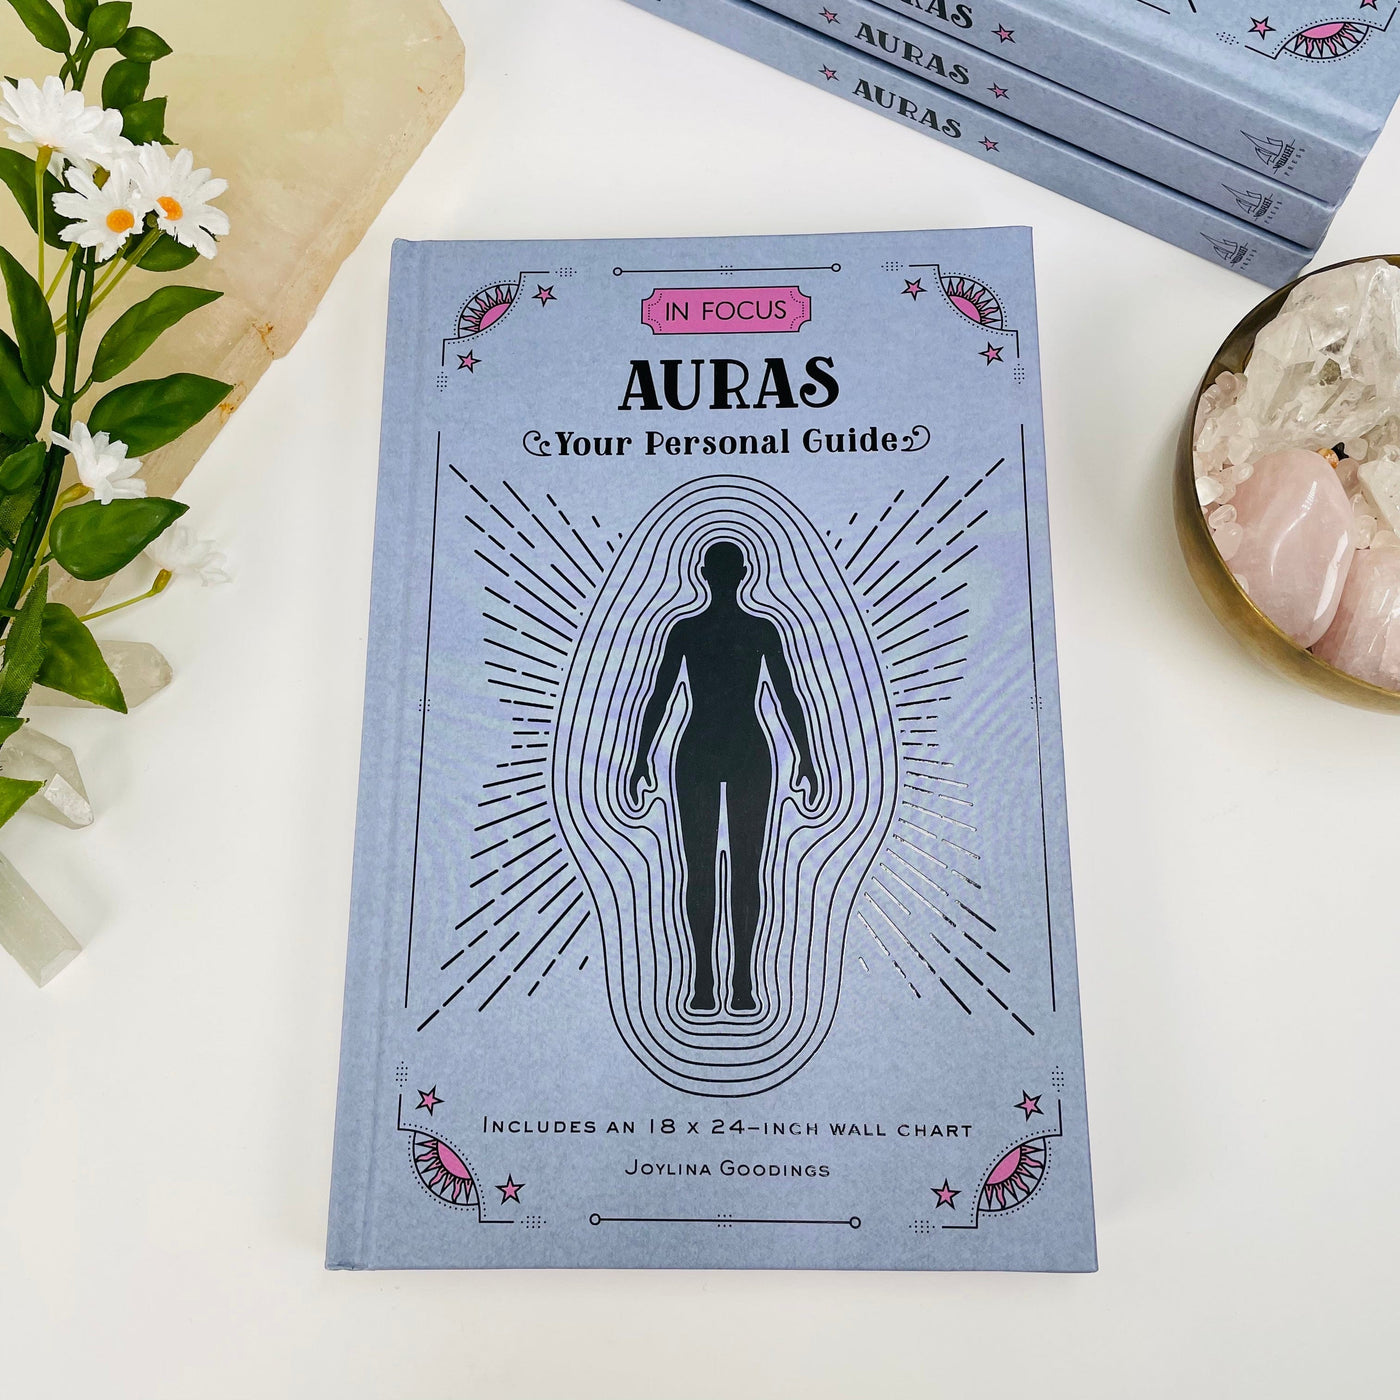 Front cover of the auras book by Joylina Goodings